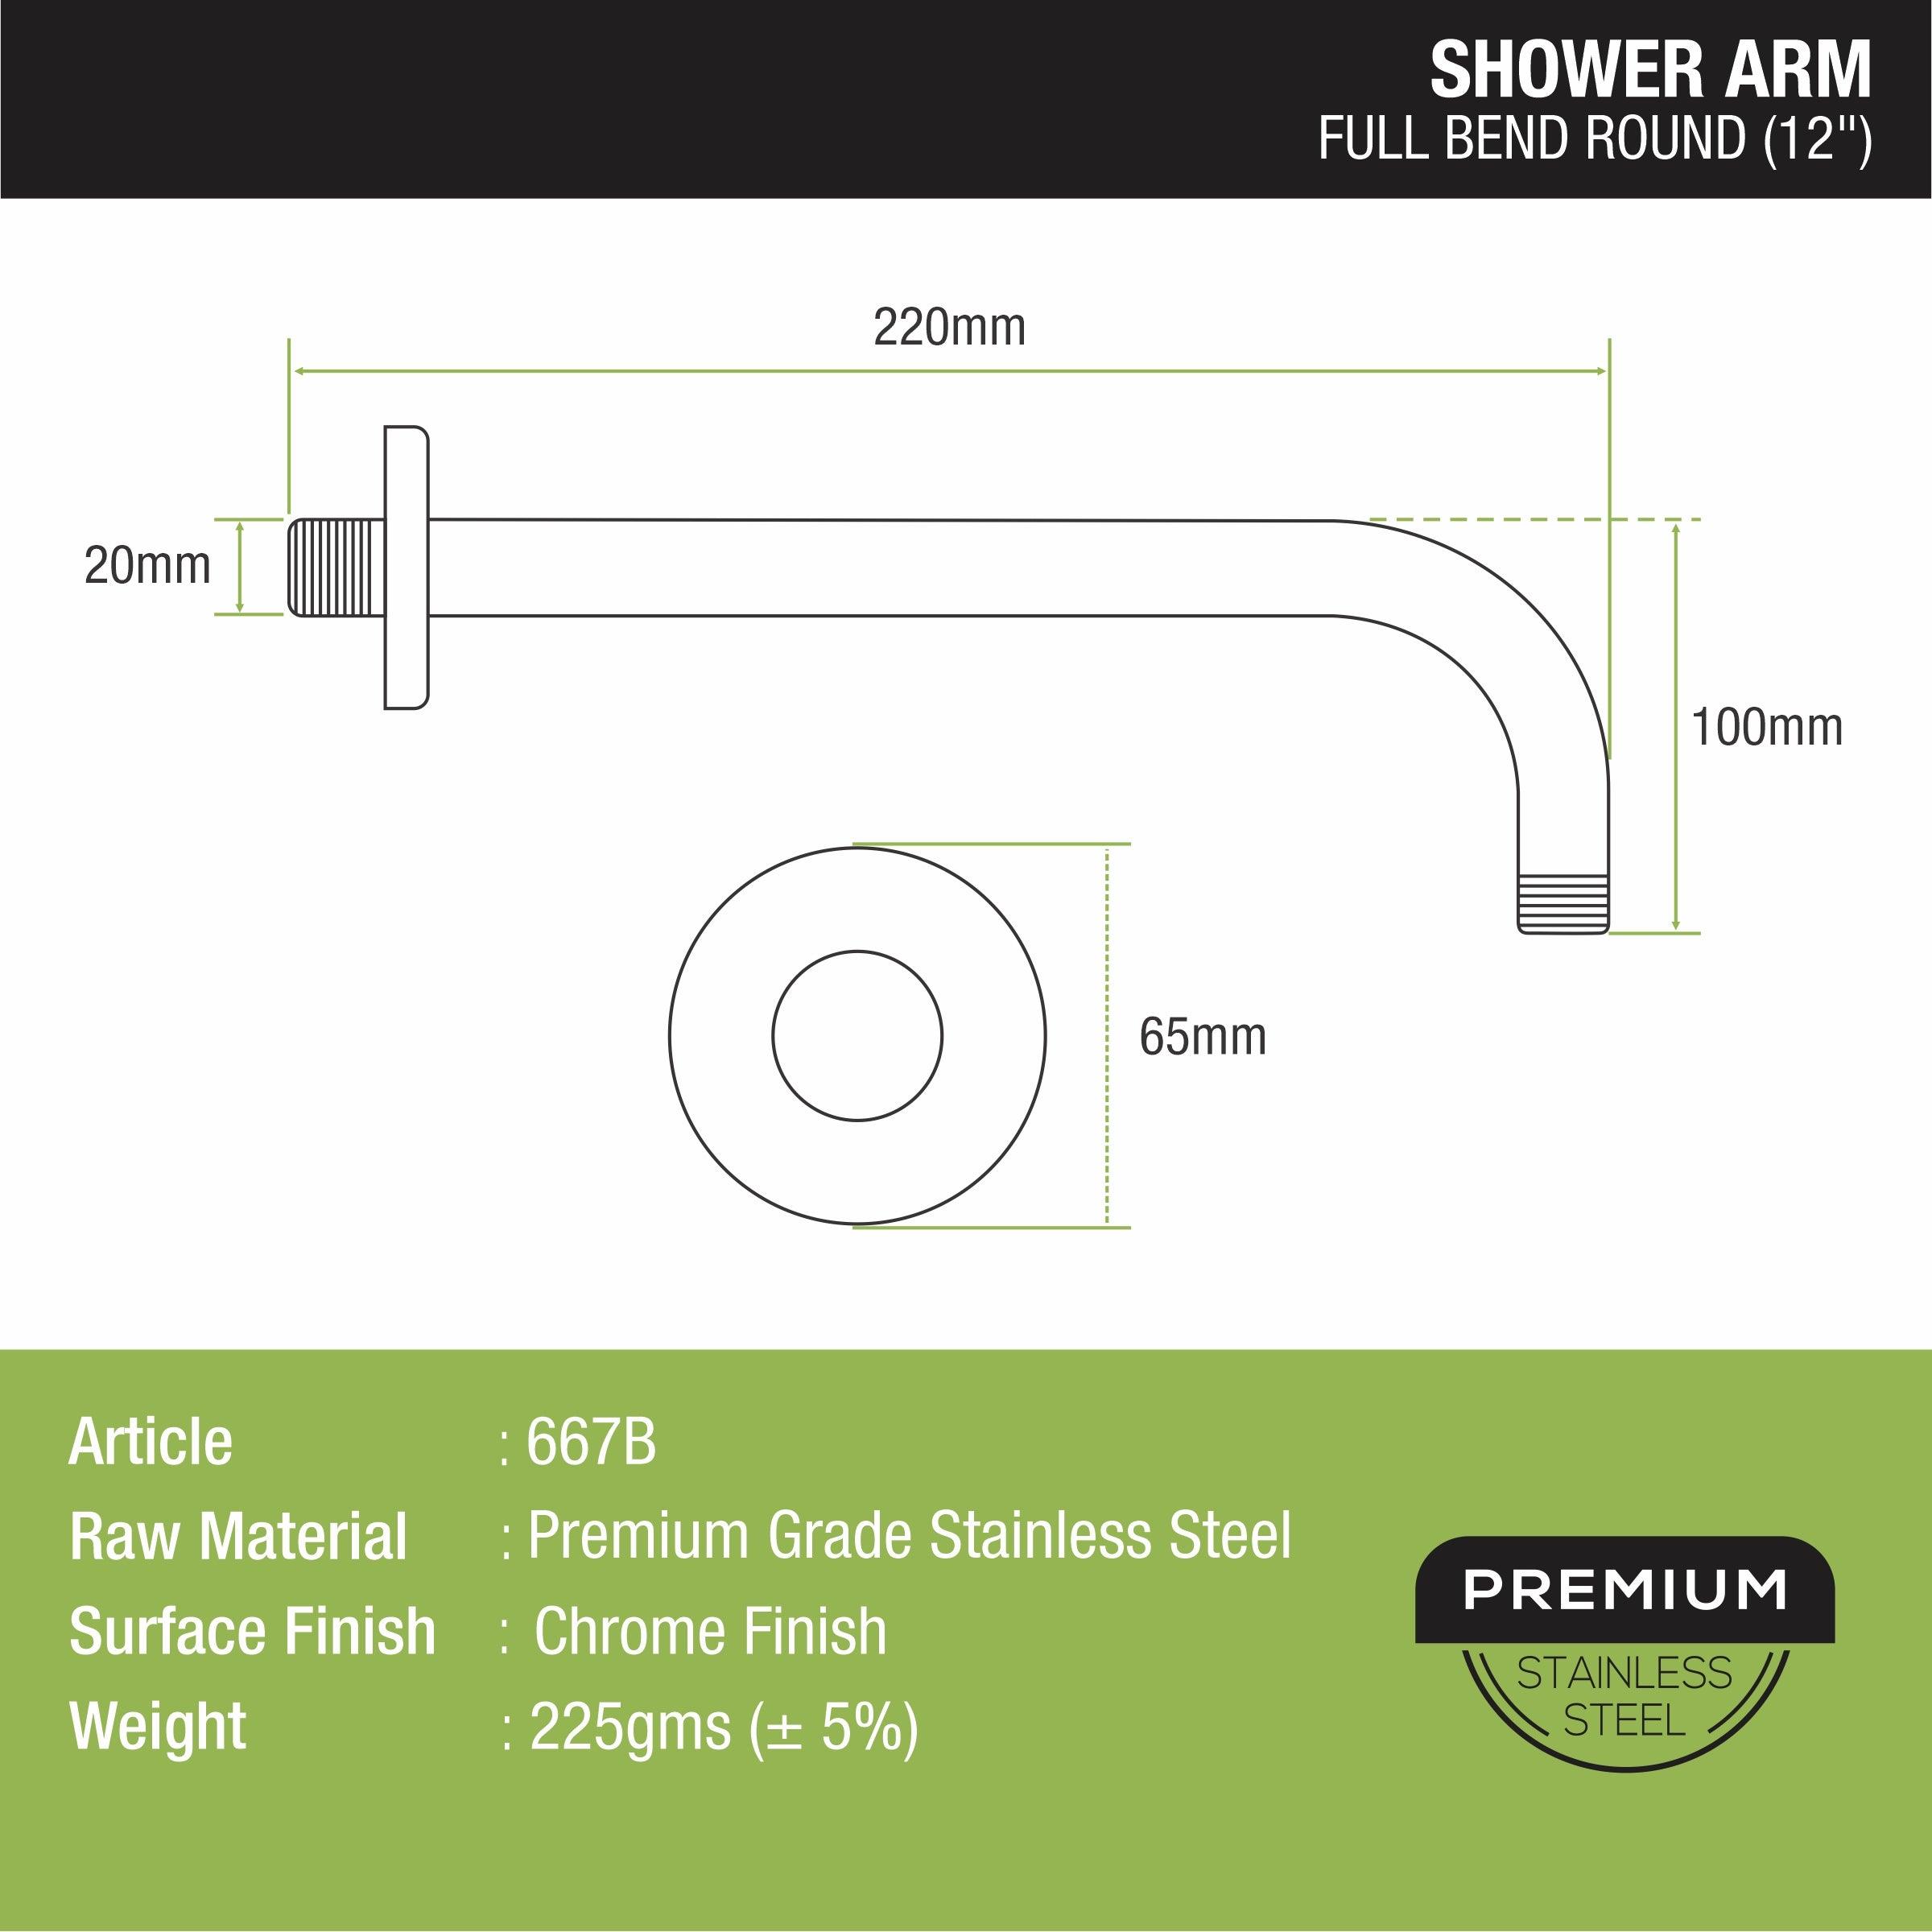 Full Bend Round Shower Arm (12 Inches) sizes and dimensions